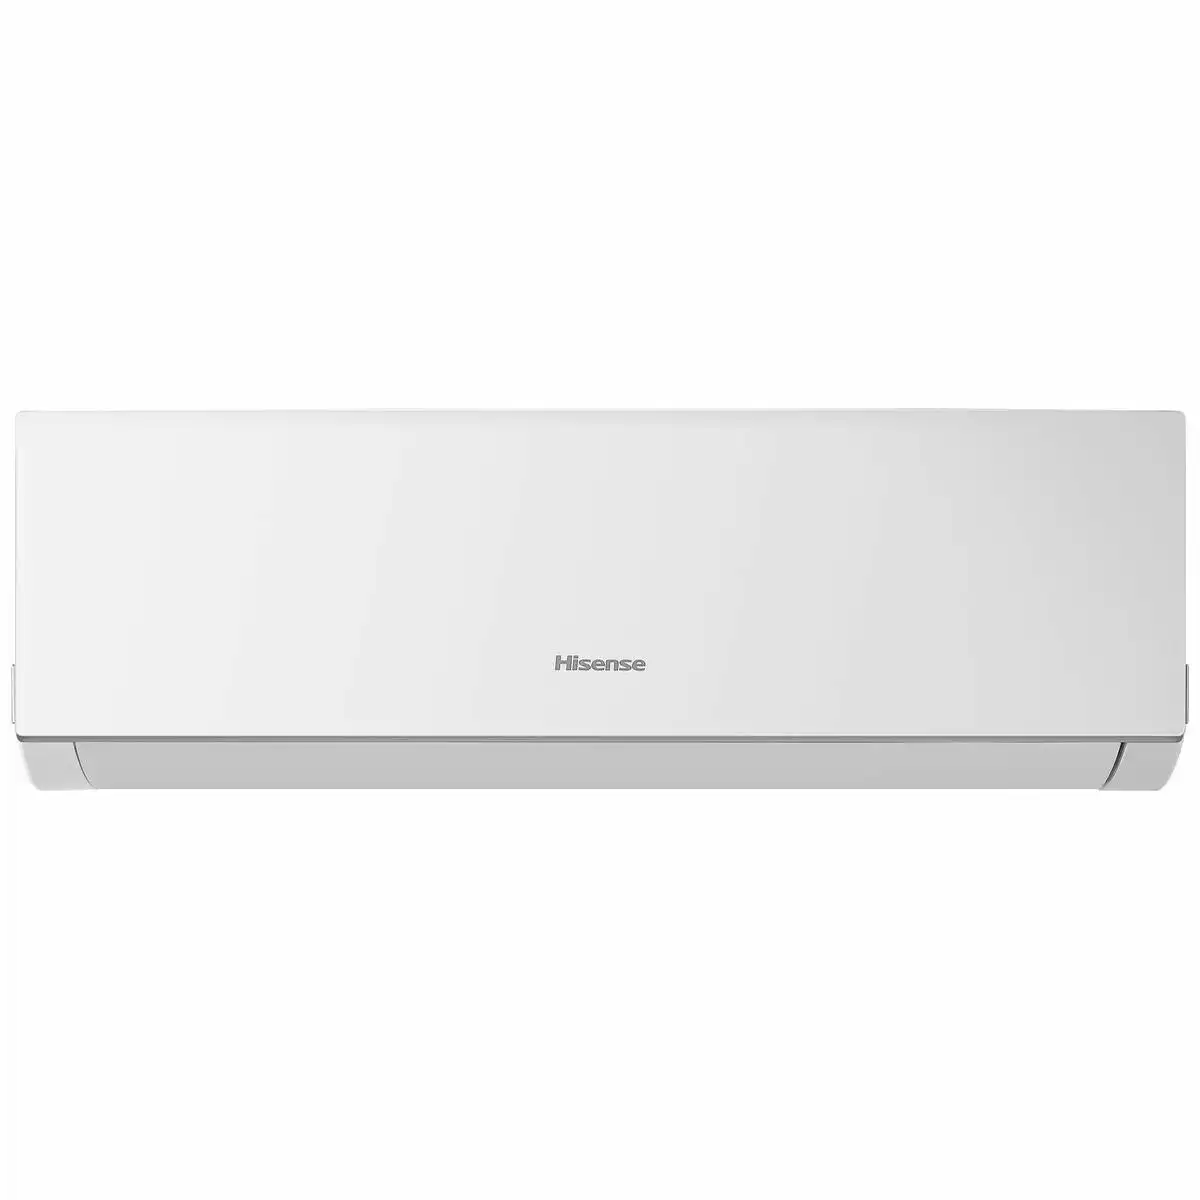 Hisense 5.0kw Reverse Cycle Air Conditioner